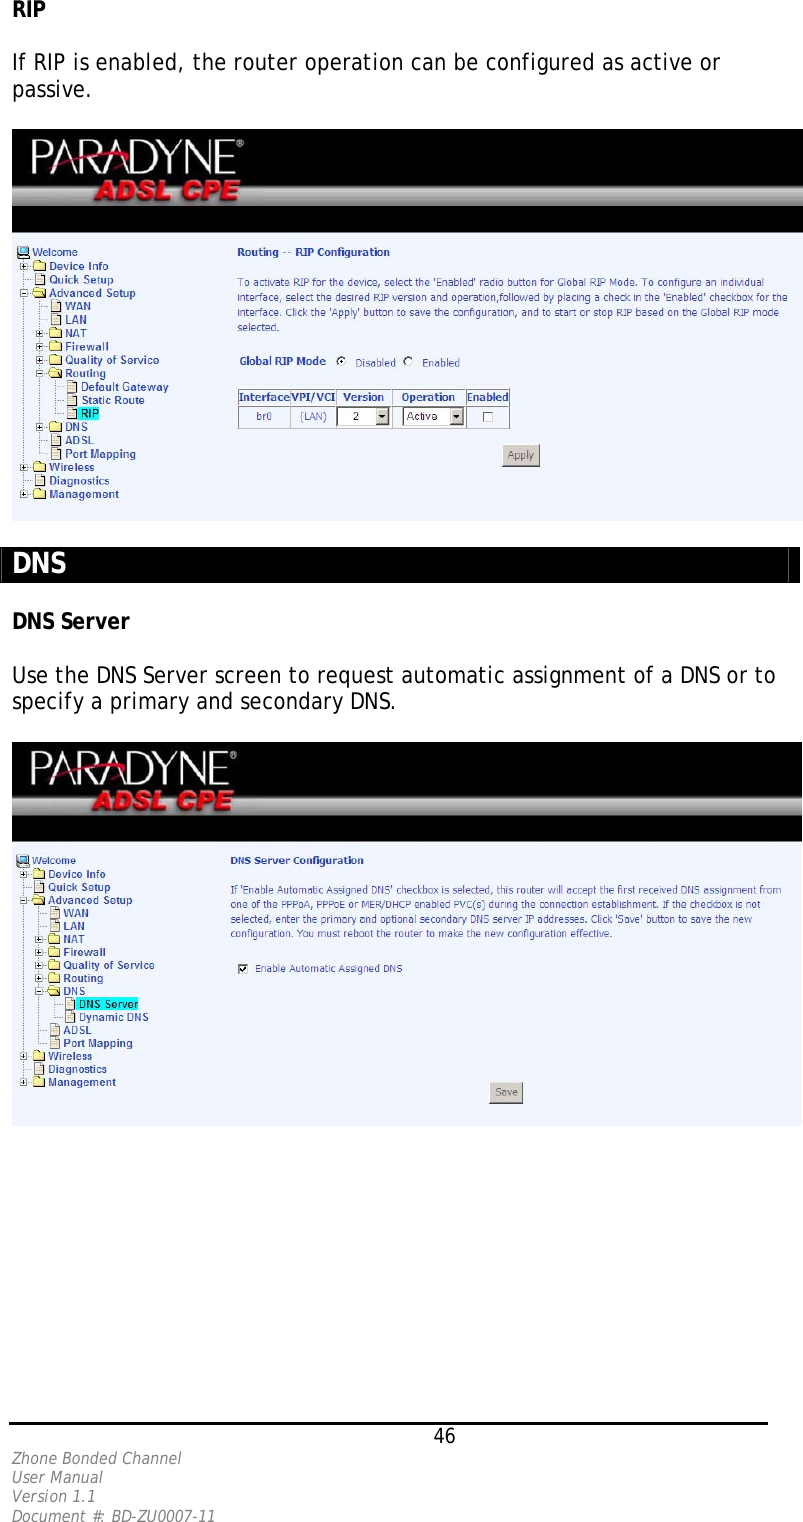 RIP   If RIP is enabled, the router operation can be configured as active or passive.     DNS   DNS Server   Use the DNS Server screen to request automatic assignment of a DNS or to specify a primary and secondary DNS.       46 Zhone Bonded Channel User Manual  Version 1.1 Document #: BD-ZU0007-11 